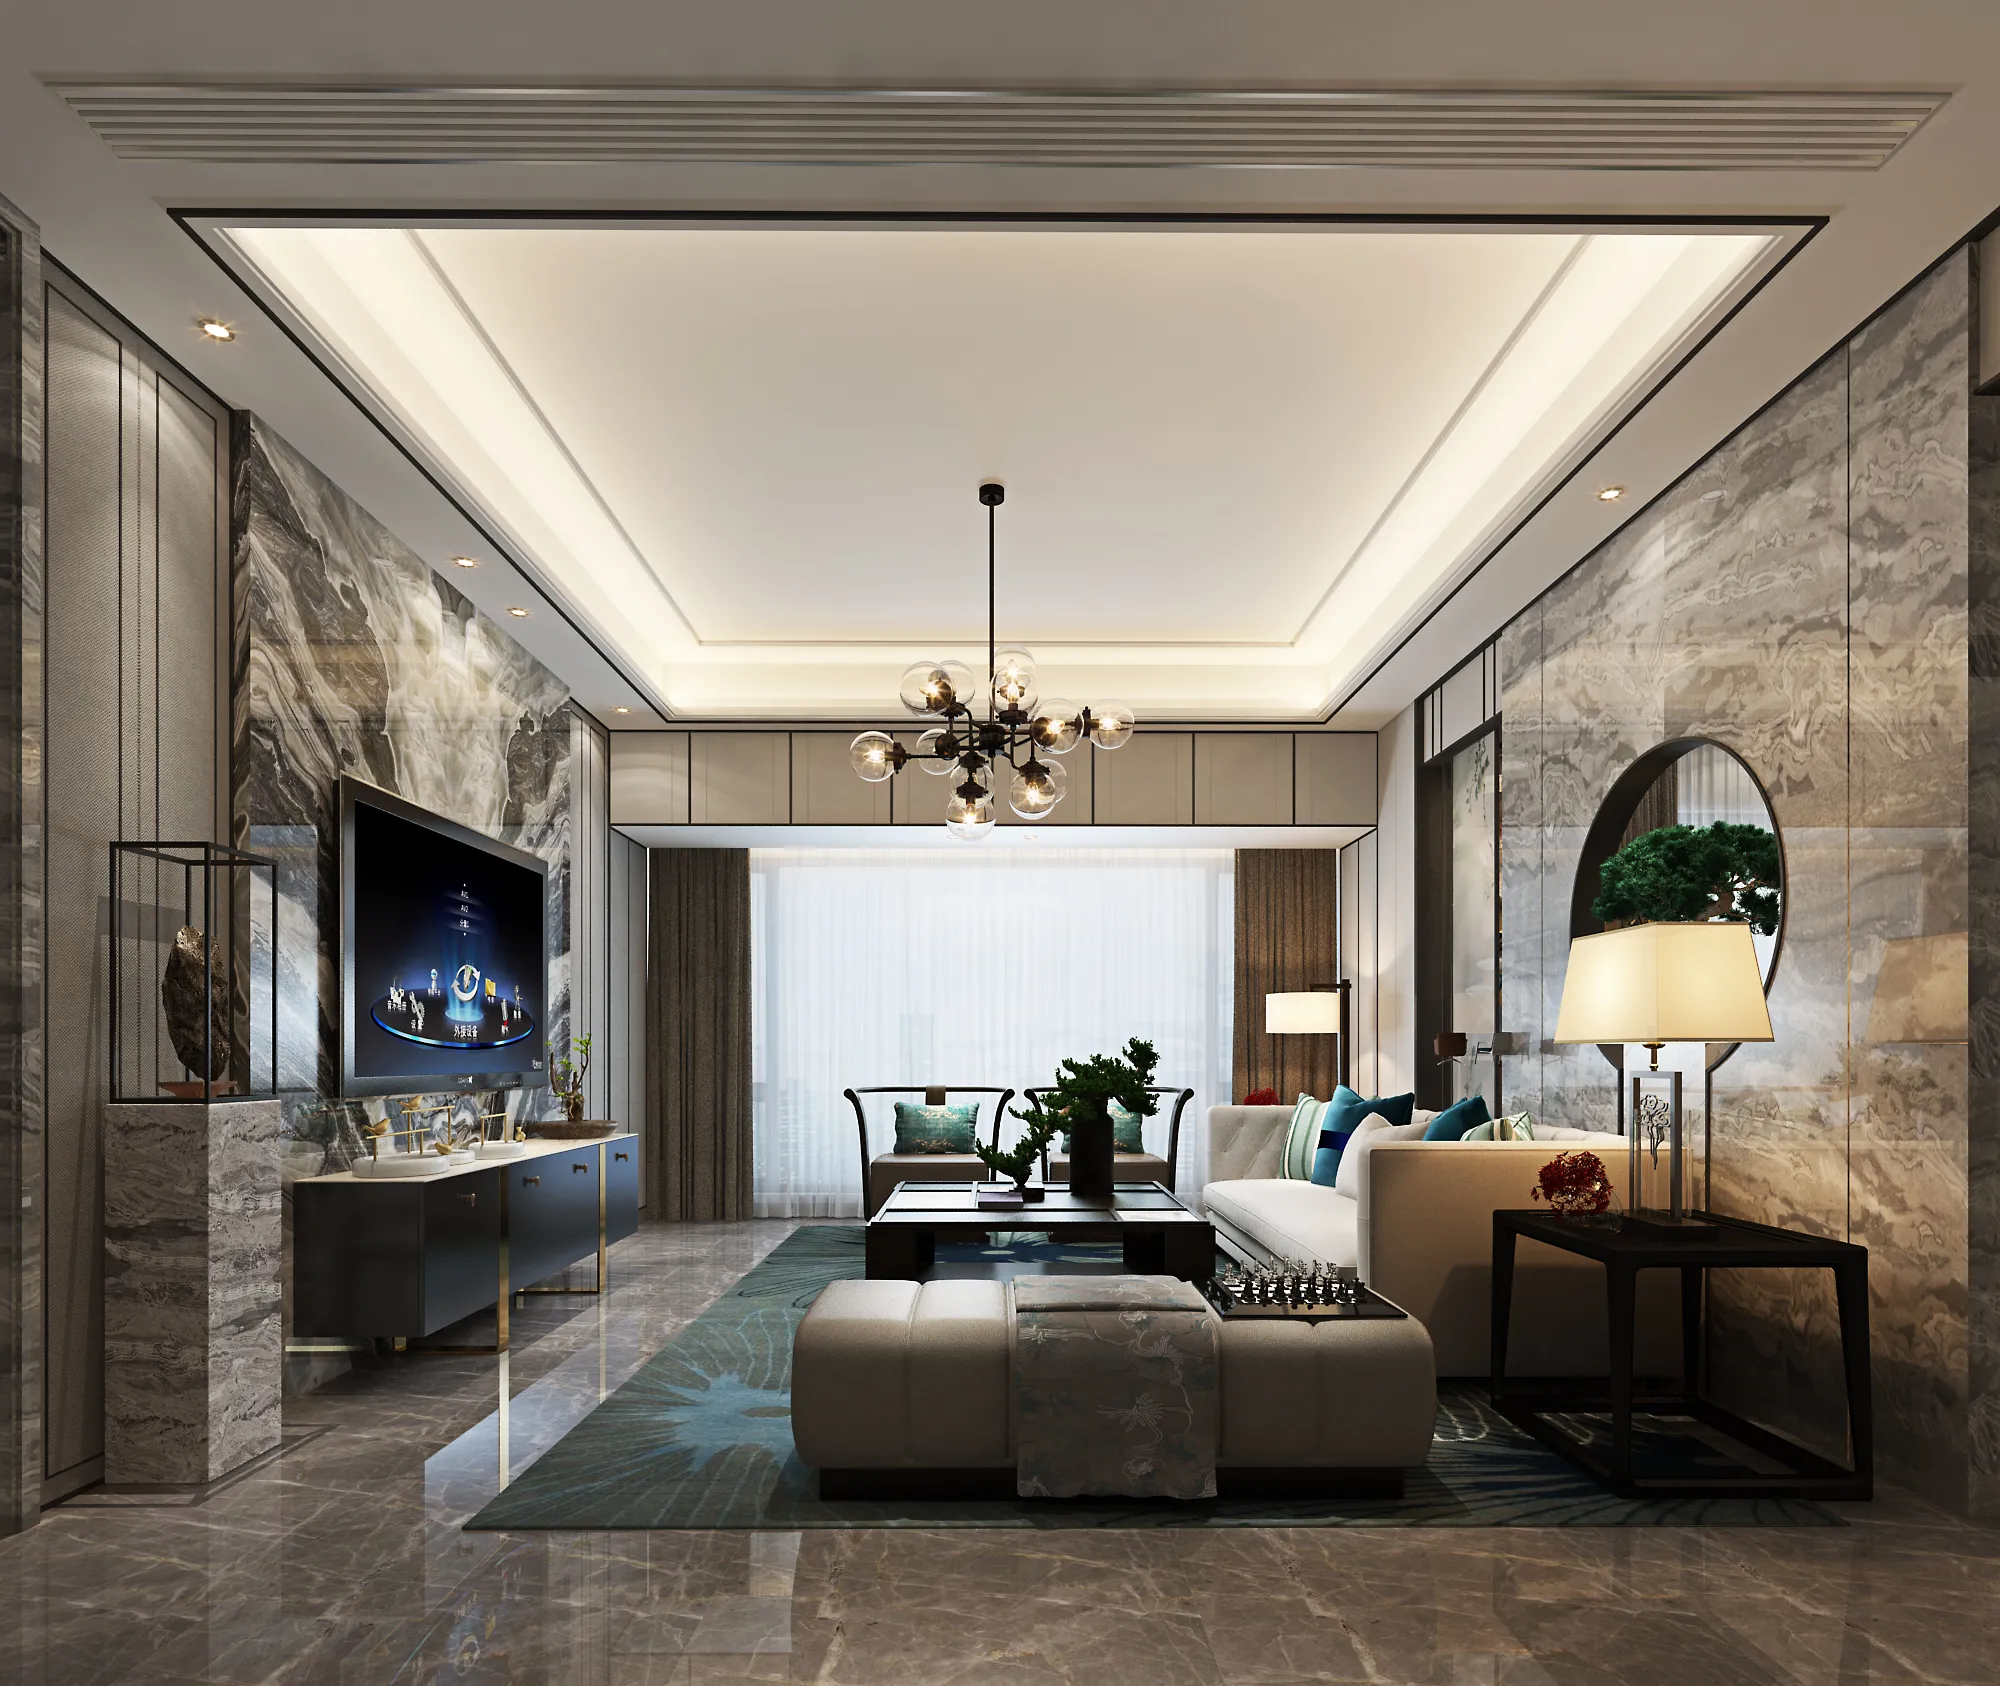 DESMOD INTERIOR 2021 (VRAY) – 4. LIVING ROOM – CHINESE – 093